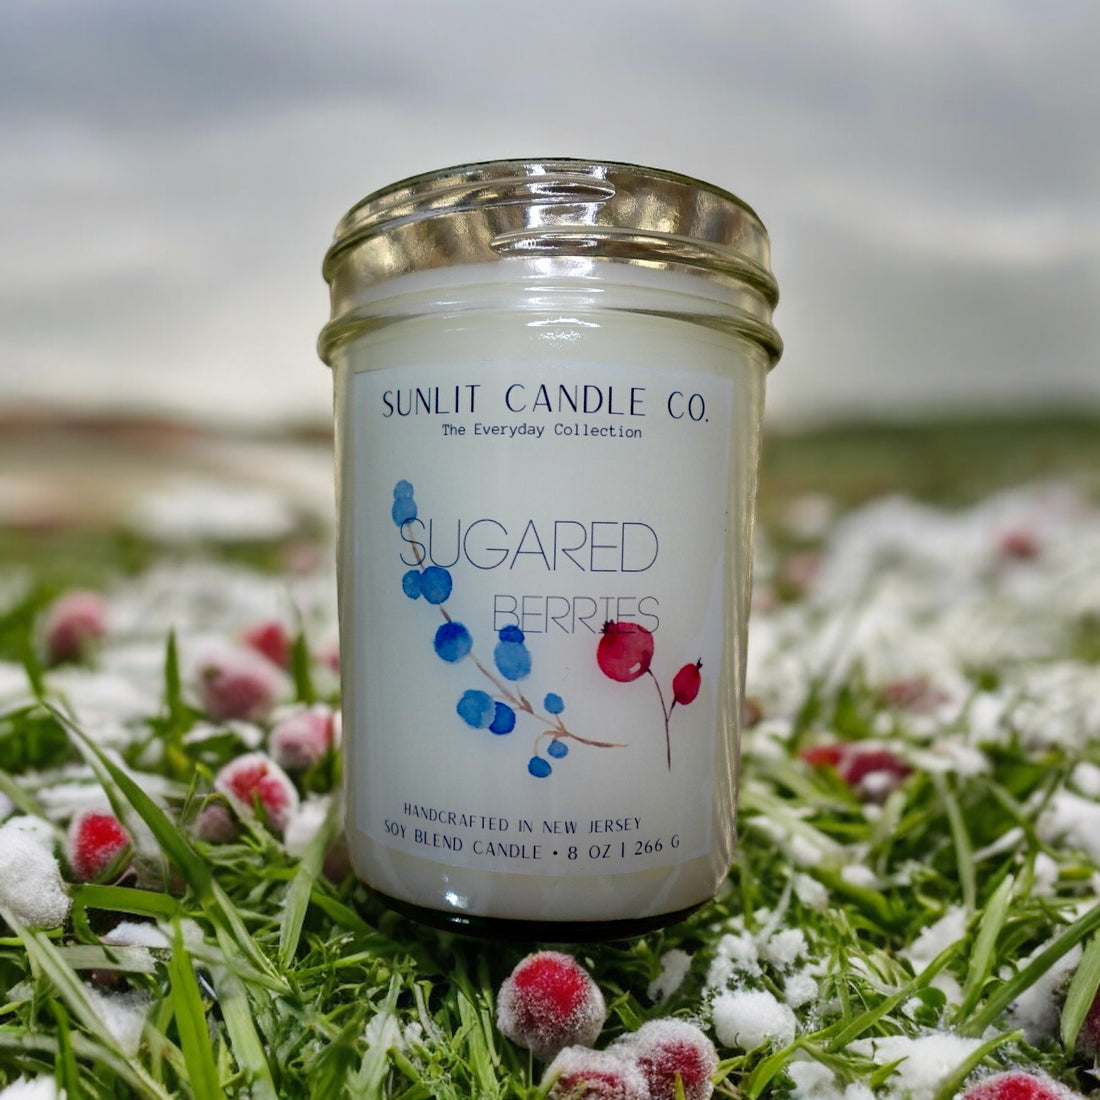  Sugared Berries Candle - SunLit Candle Co.